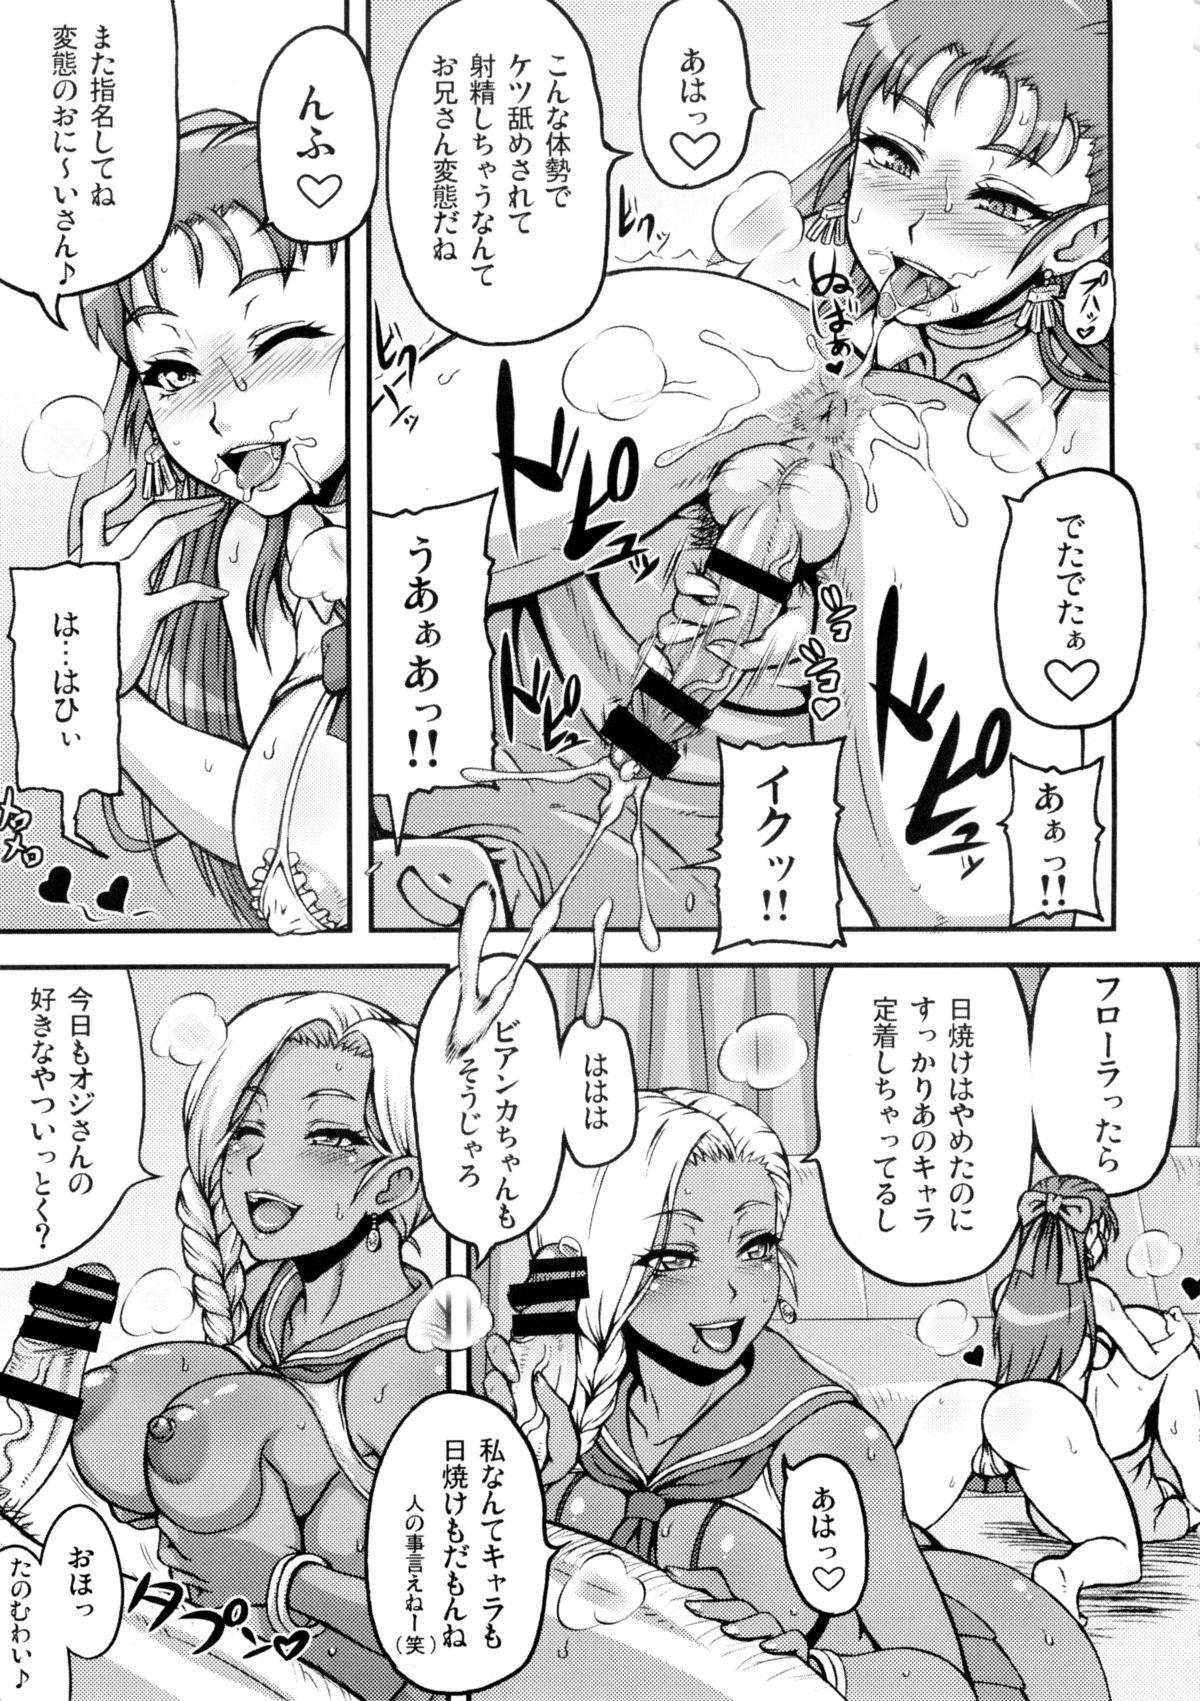 Amazing Dragon Queen's 3 - Dragon quest v Mother fuck - Page 4